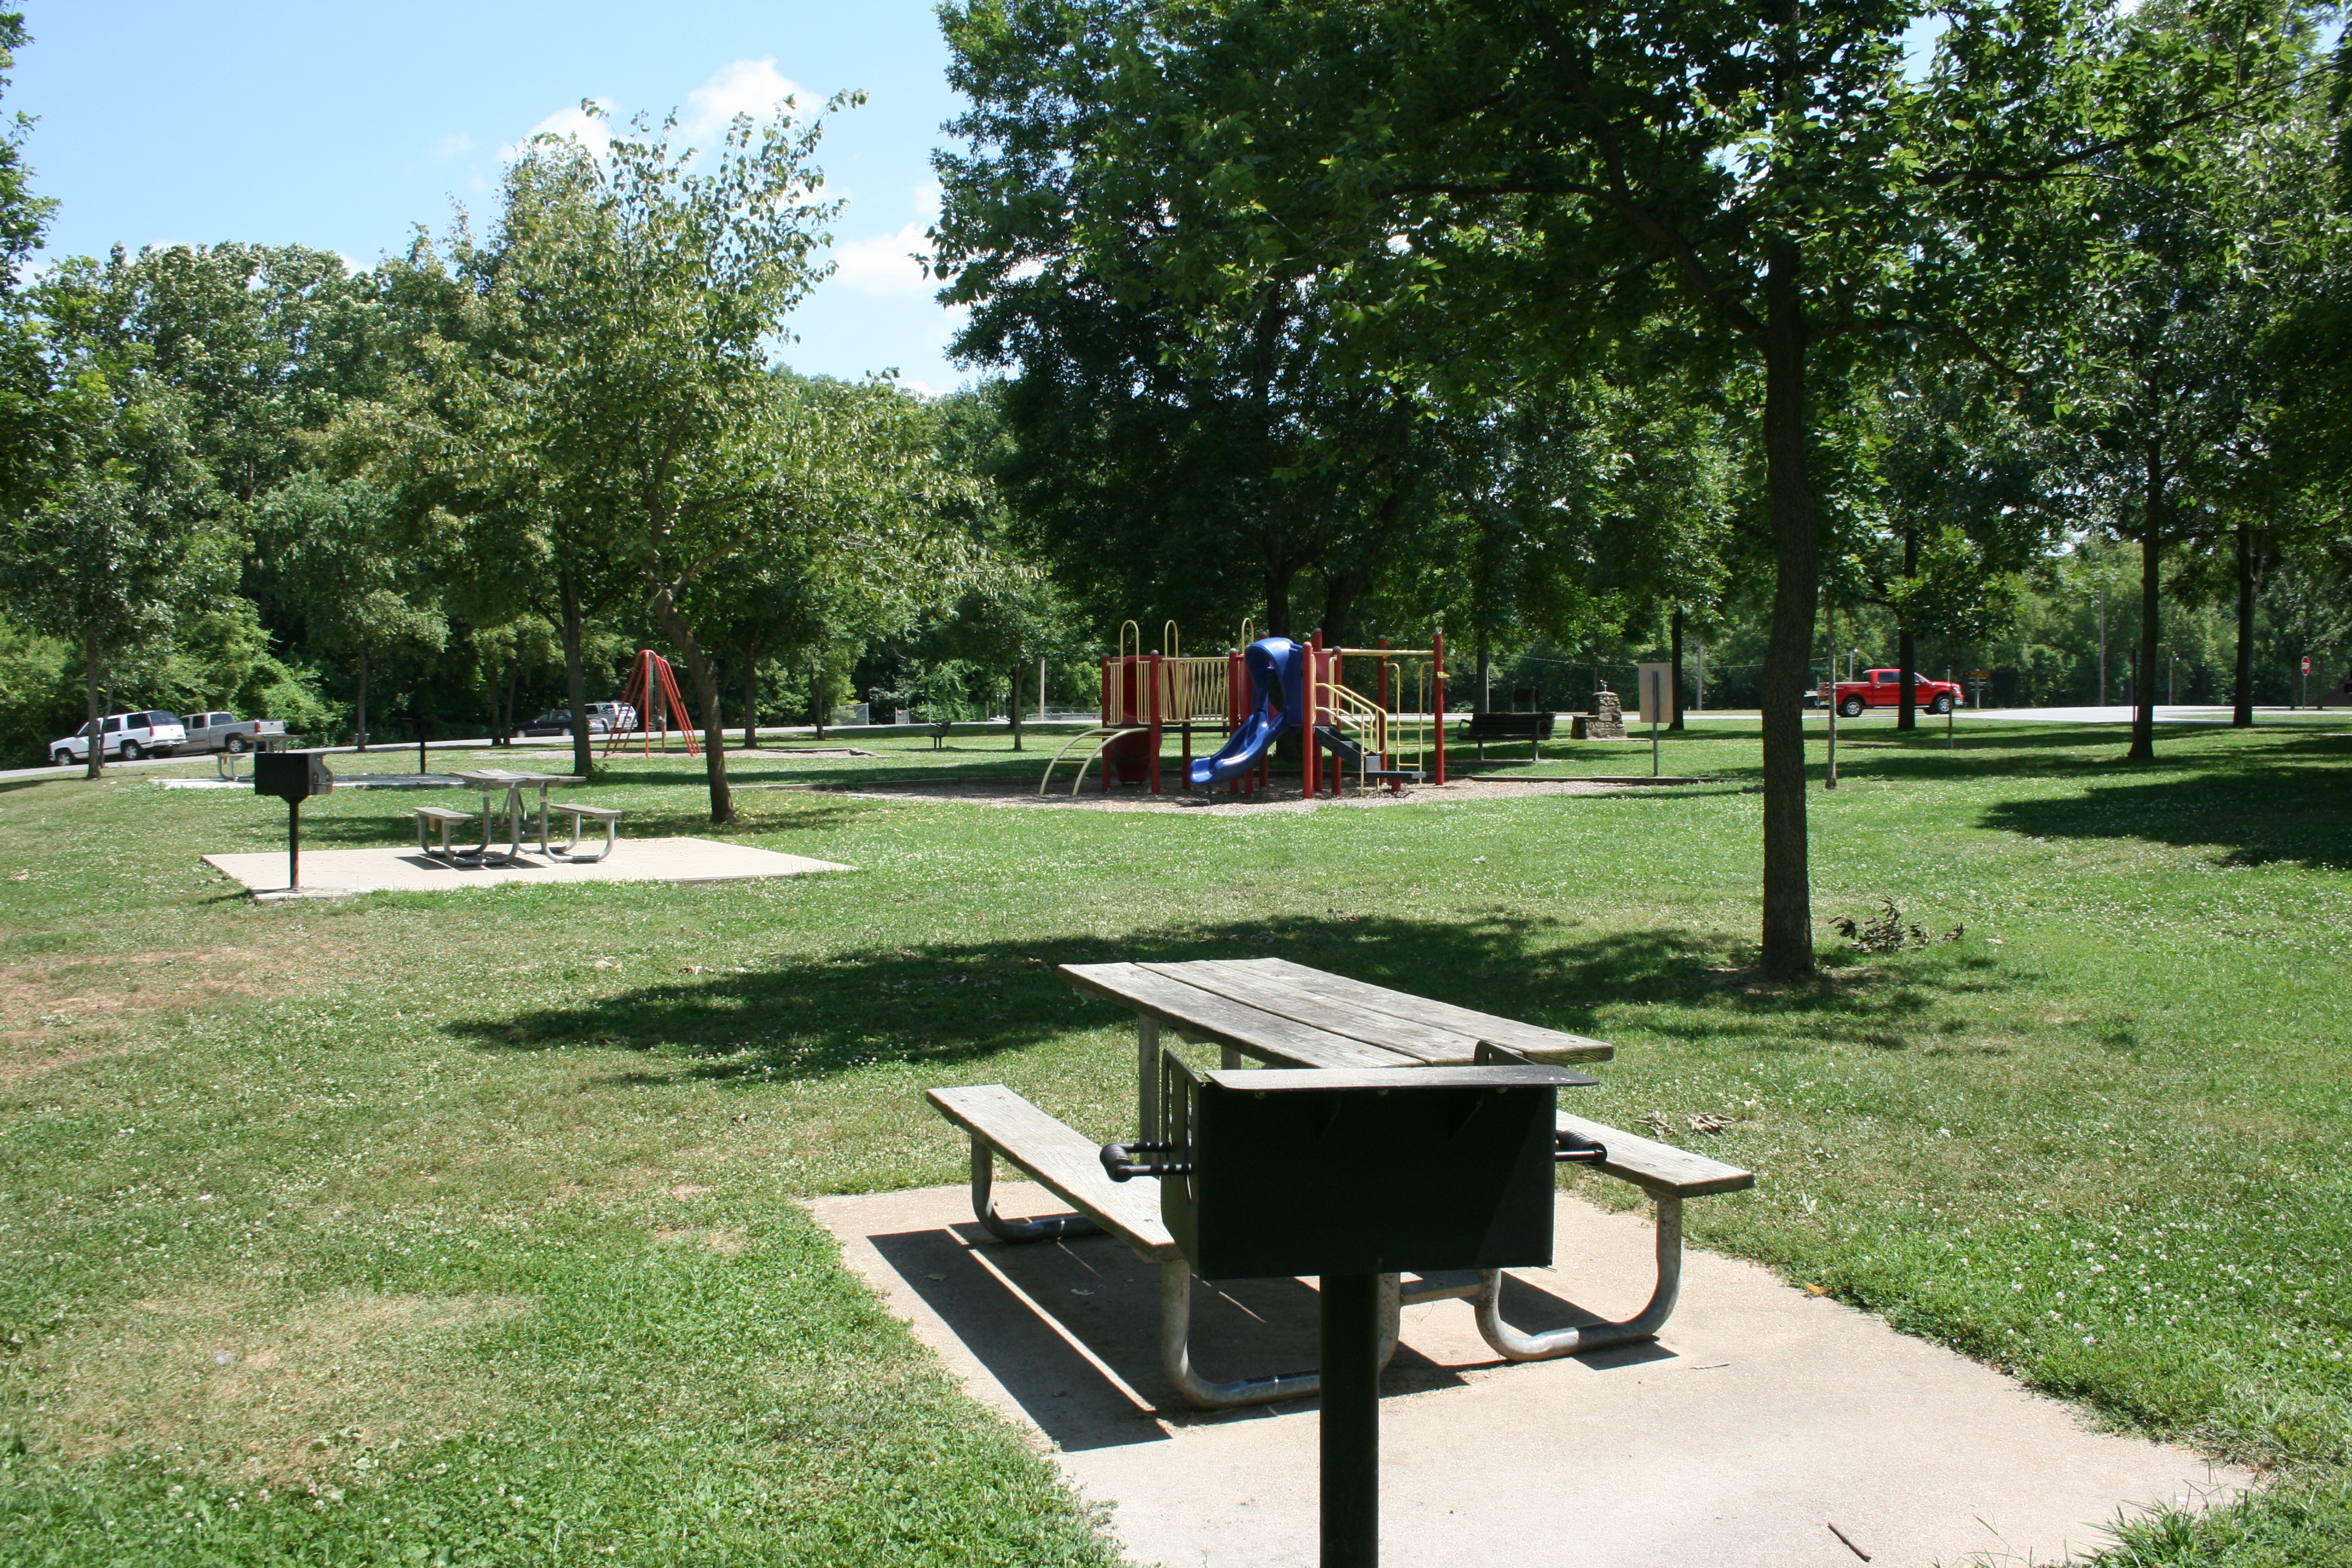 A sunny picnic area with scattered picnic tables with grills